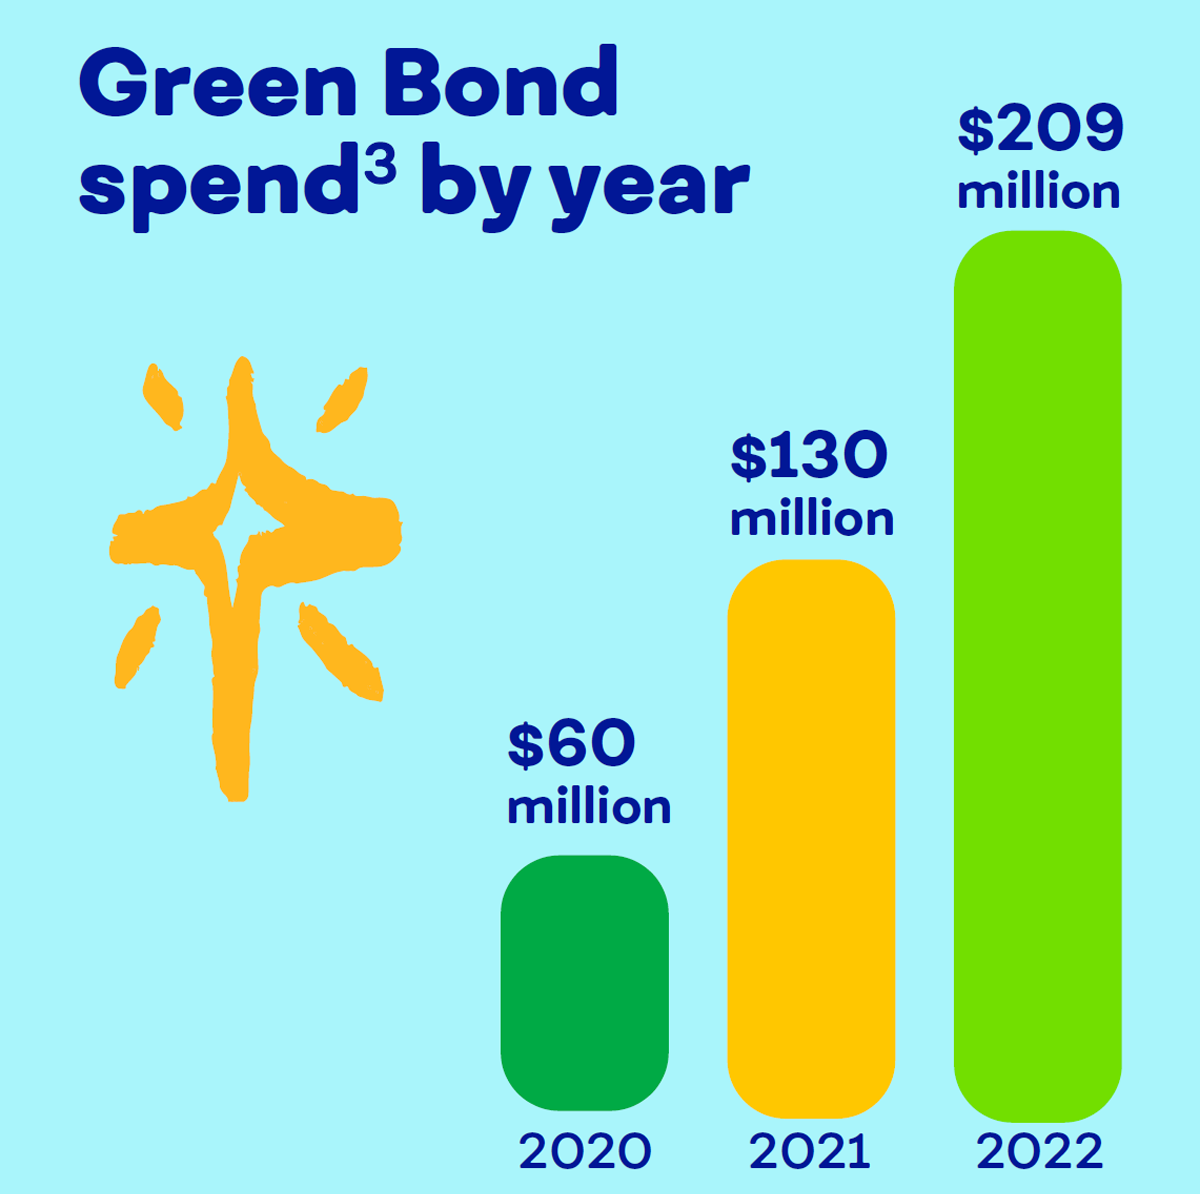 Green Bond spend by year: $60 million in 2020, $130 million in 2021, and $209 million in 2022. Refer to footnote 3.